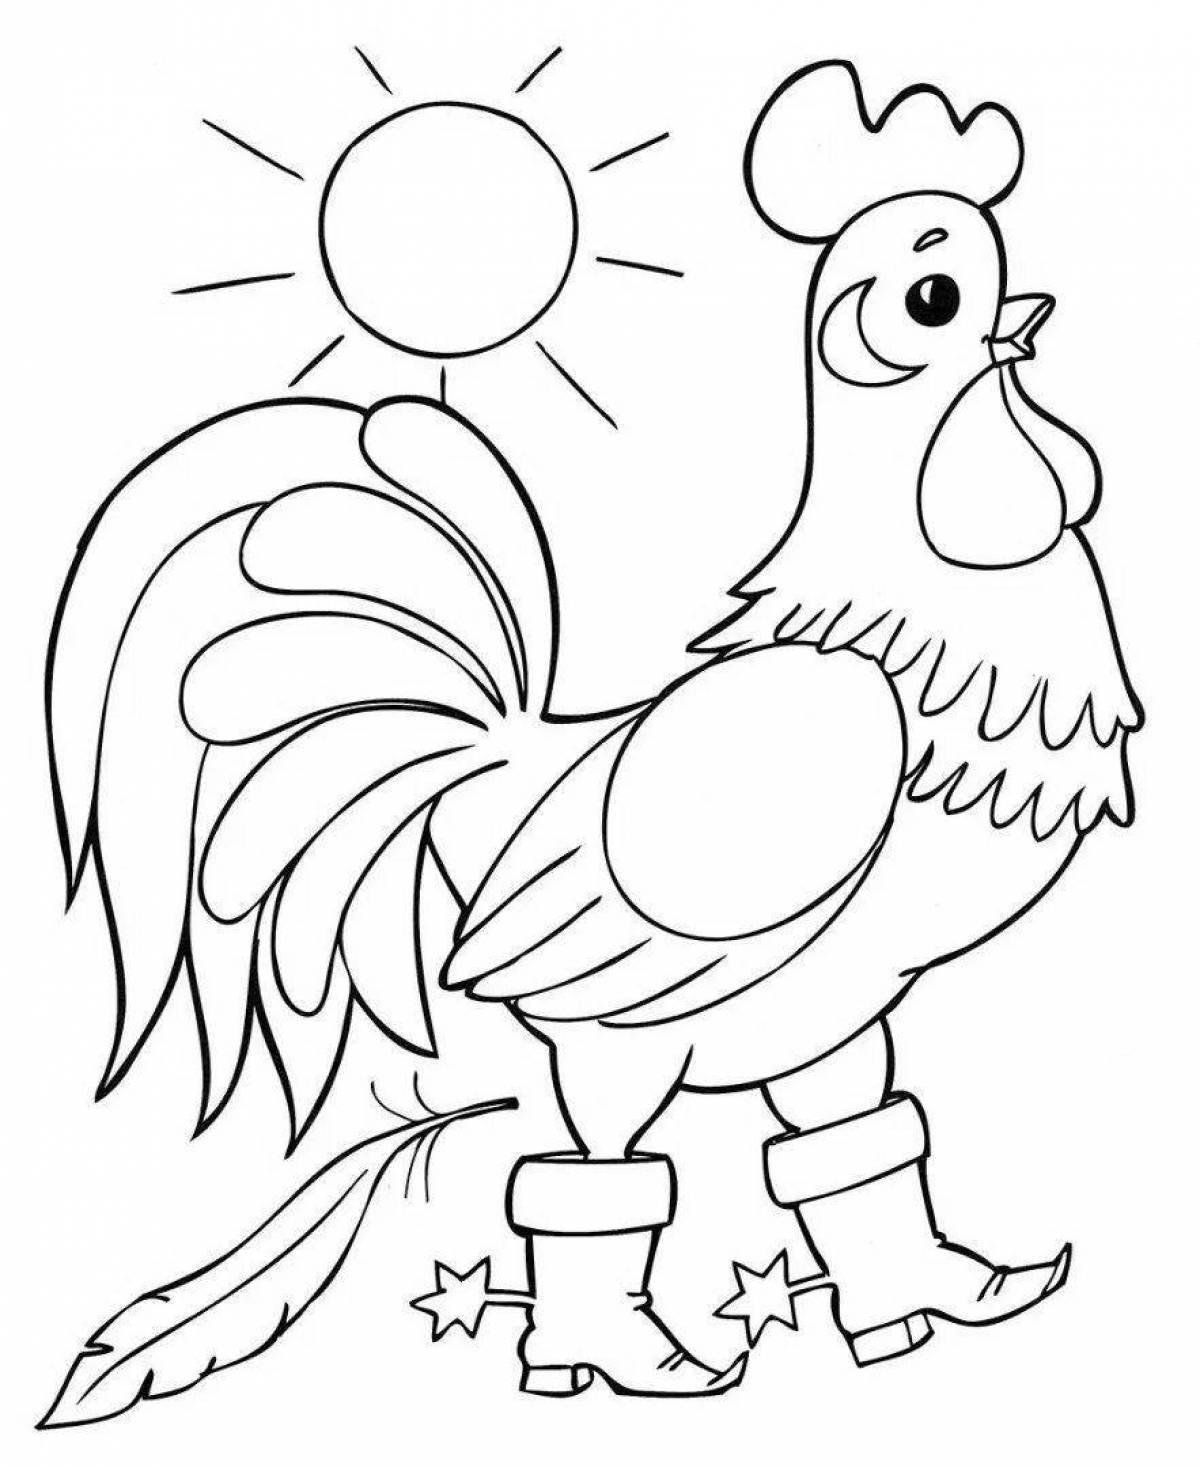 Intriguing rooster coloring book for 6-7 year olds